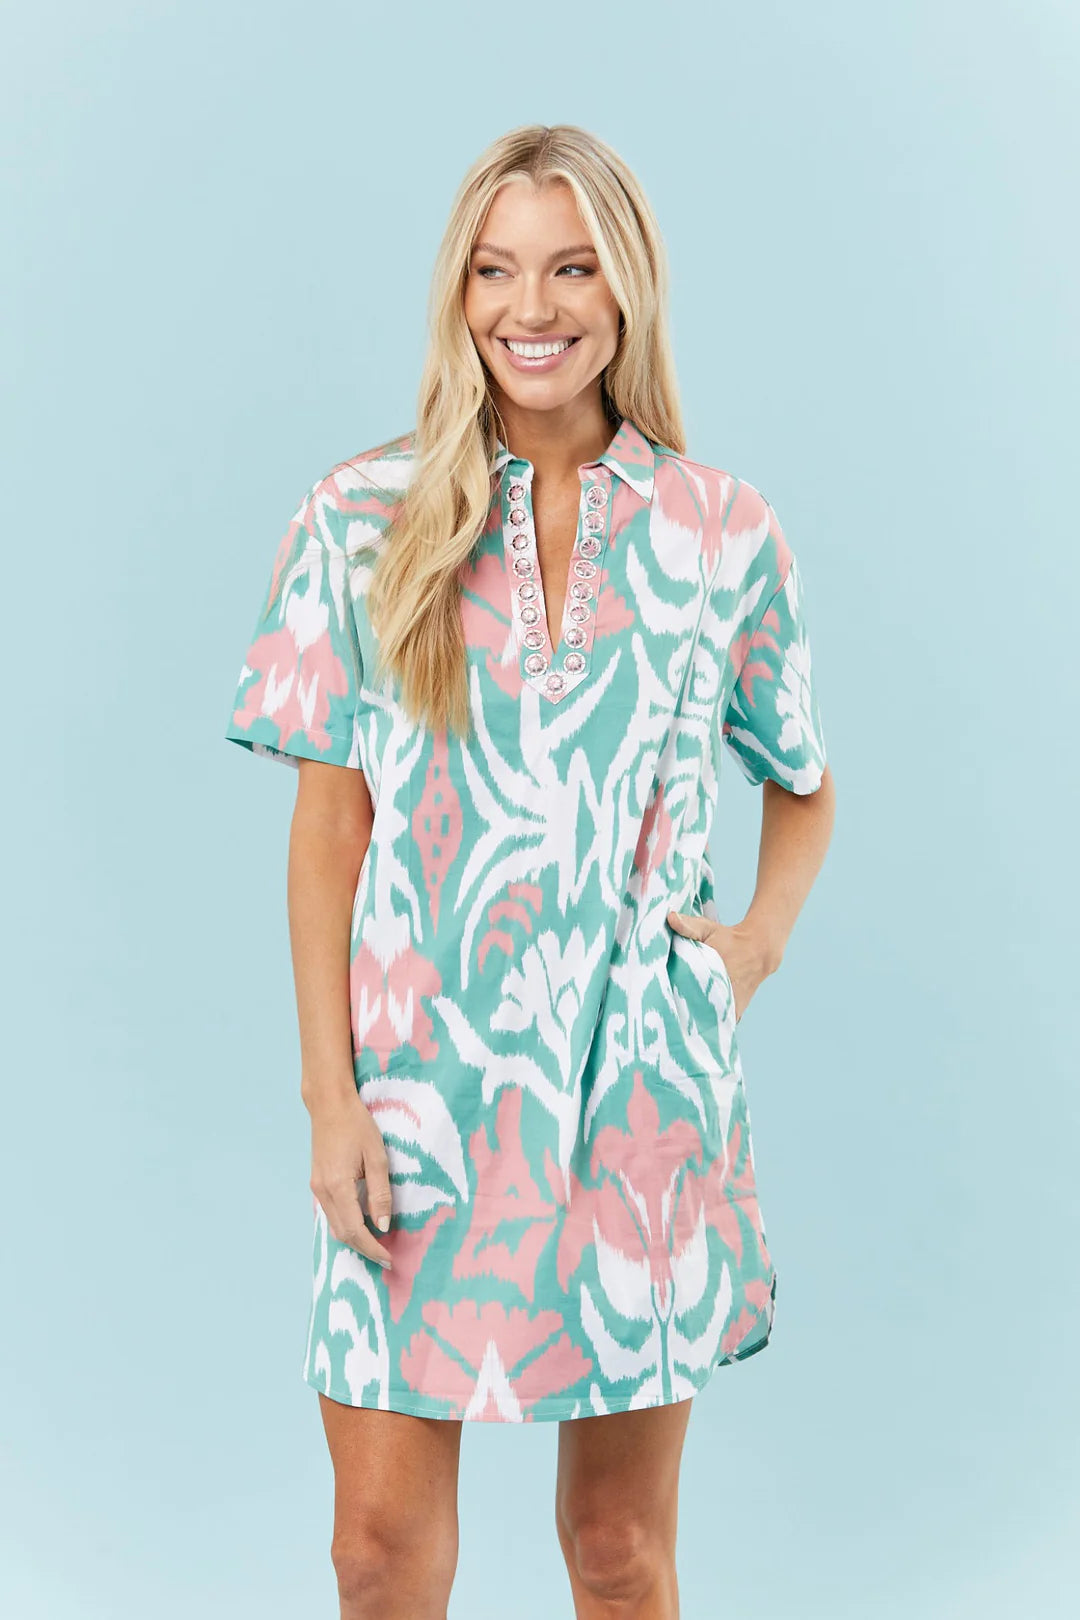 Sheridan French Rhodes Dress in Tulip - Ikat Teal + White + Pink